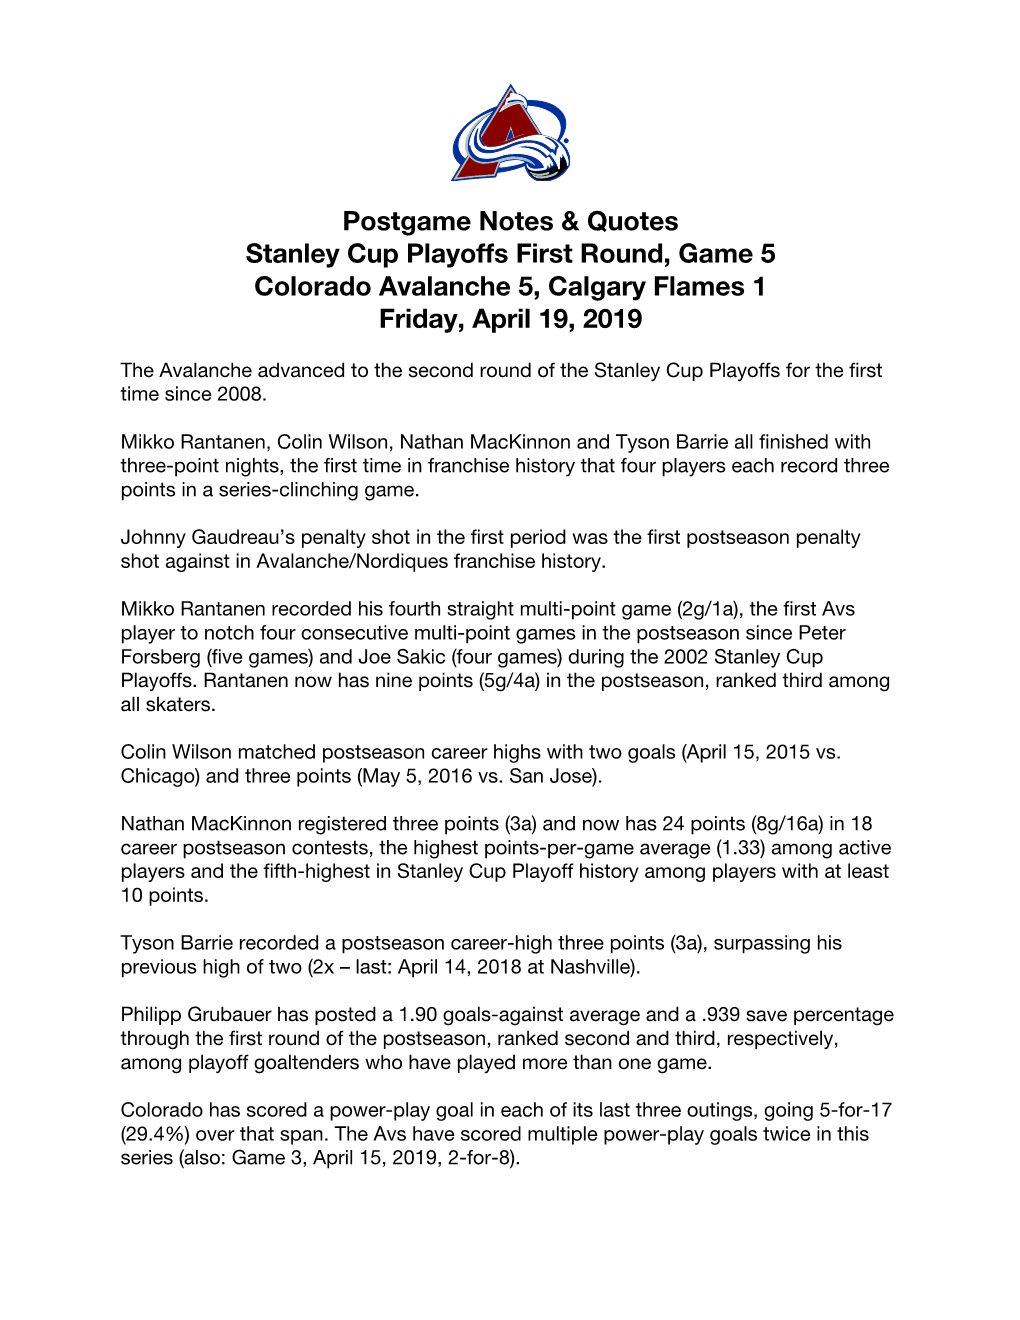 Postgame Notes & Quotes Stanley Cup Playoffs First Round, Game 5